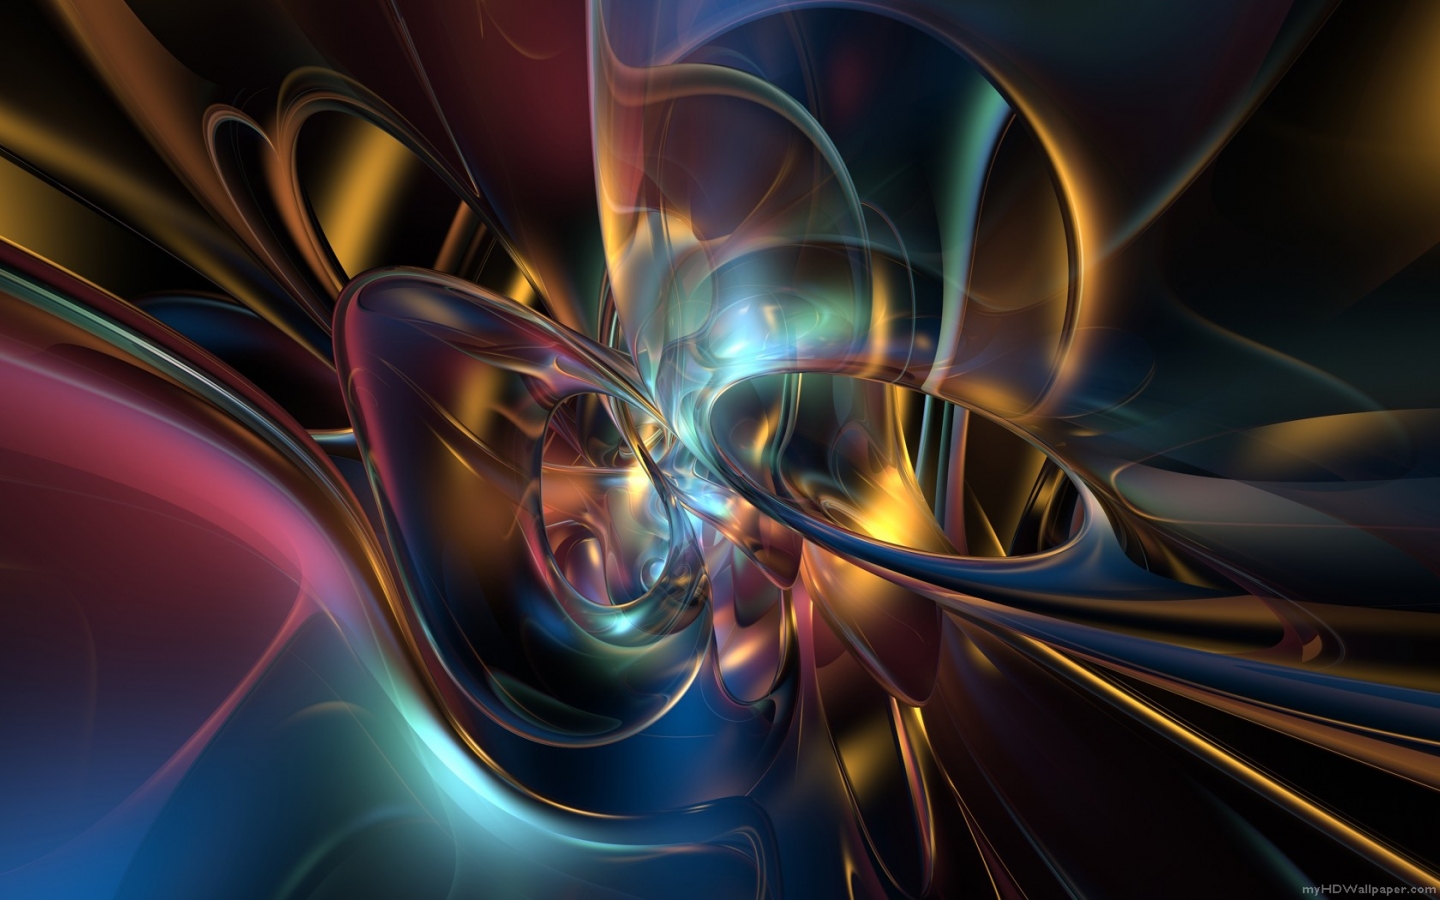 Wallpaper Backgrounds Abstract Art Wallpapers